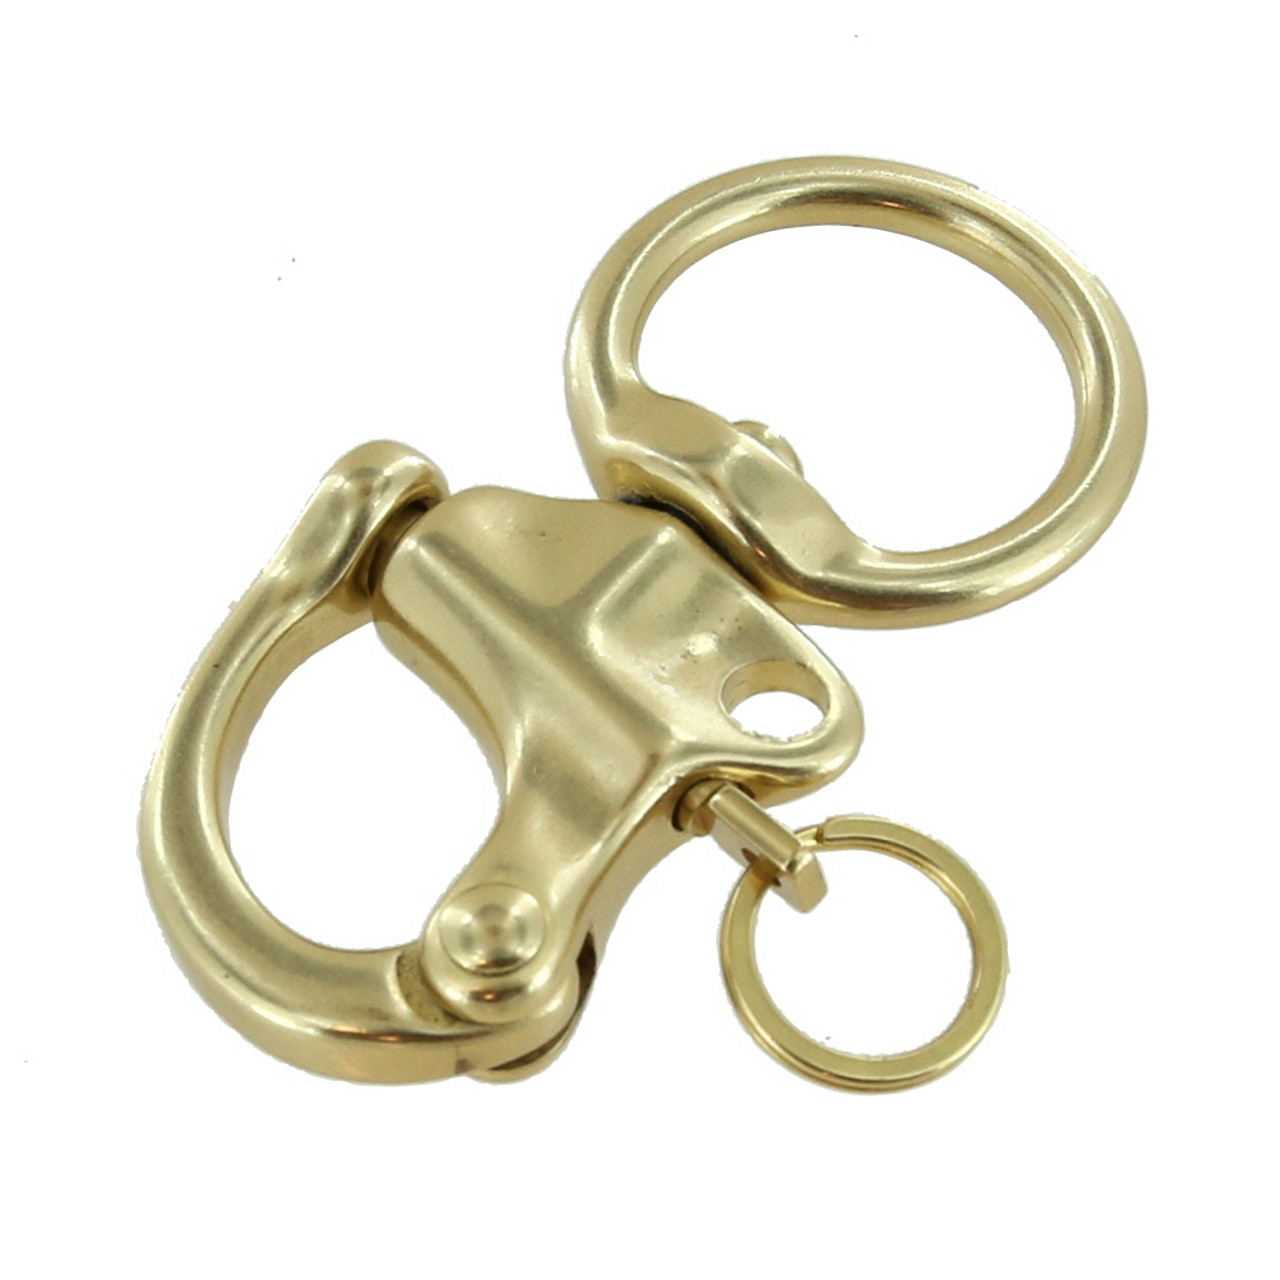 Key Kop II Locking Key Ring with 1 Inch Shackle and Tan Colored Boot